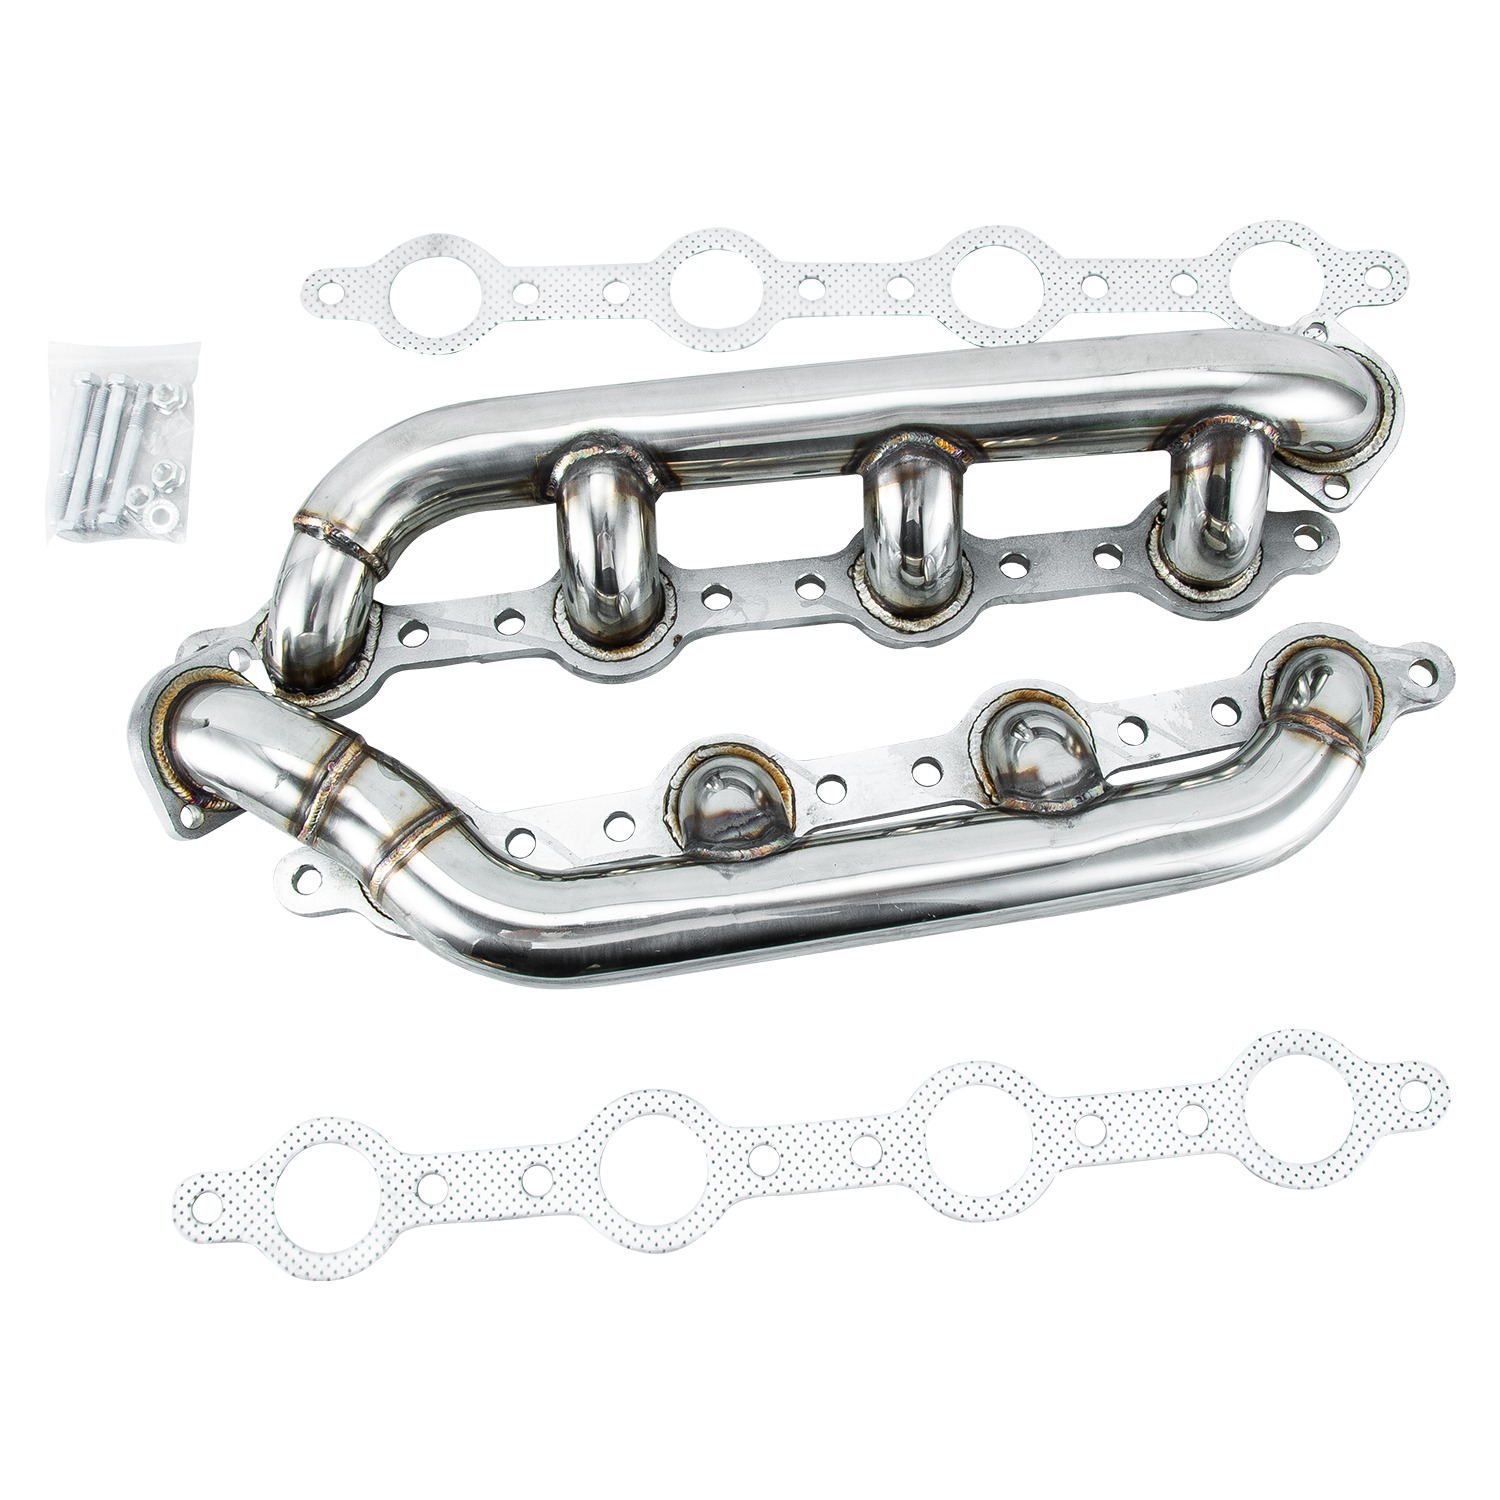 For 99-03 Ford F250 F350 F450 7.3L Powerstroke Stainless Steel Headers Manifold